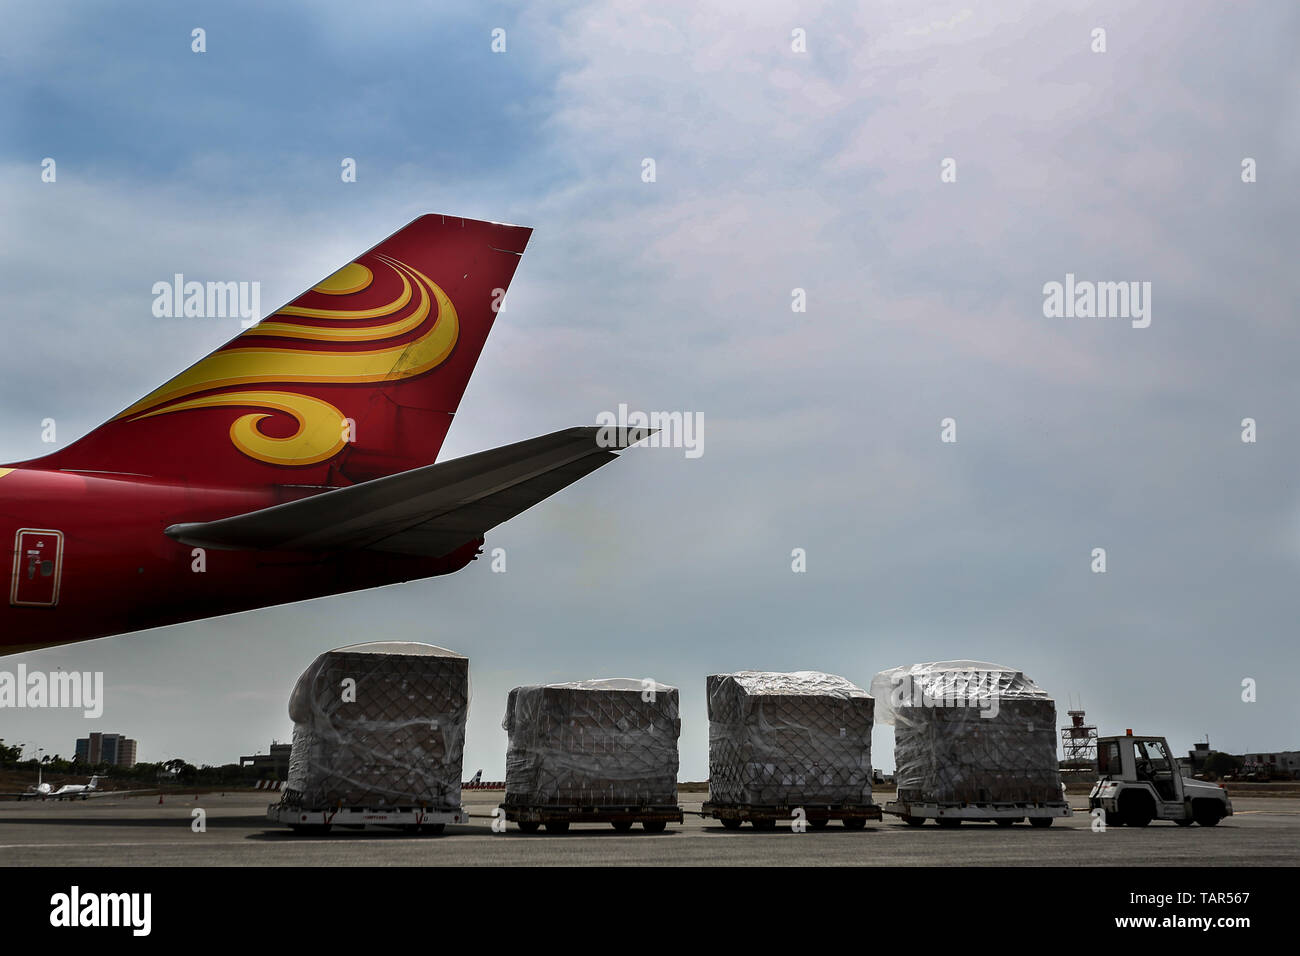 Caracas, Venezuela. 27th May, 2019. Goods from China are unloaded at the international airport. Venezuela is in a deep political and economic crisis. Due to a lack of foreign currency, food and medicines can hardly be imported. Meanwhile some relief supplies reach the country via the Red Cross. China is also helping Venezuela. Credit: Pedro Mattey/dpa/Alamy Live News Stock Photo